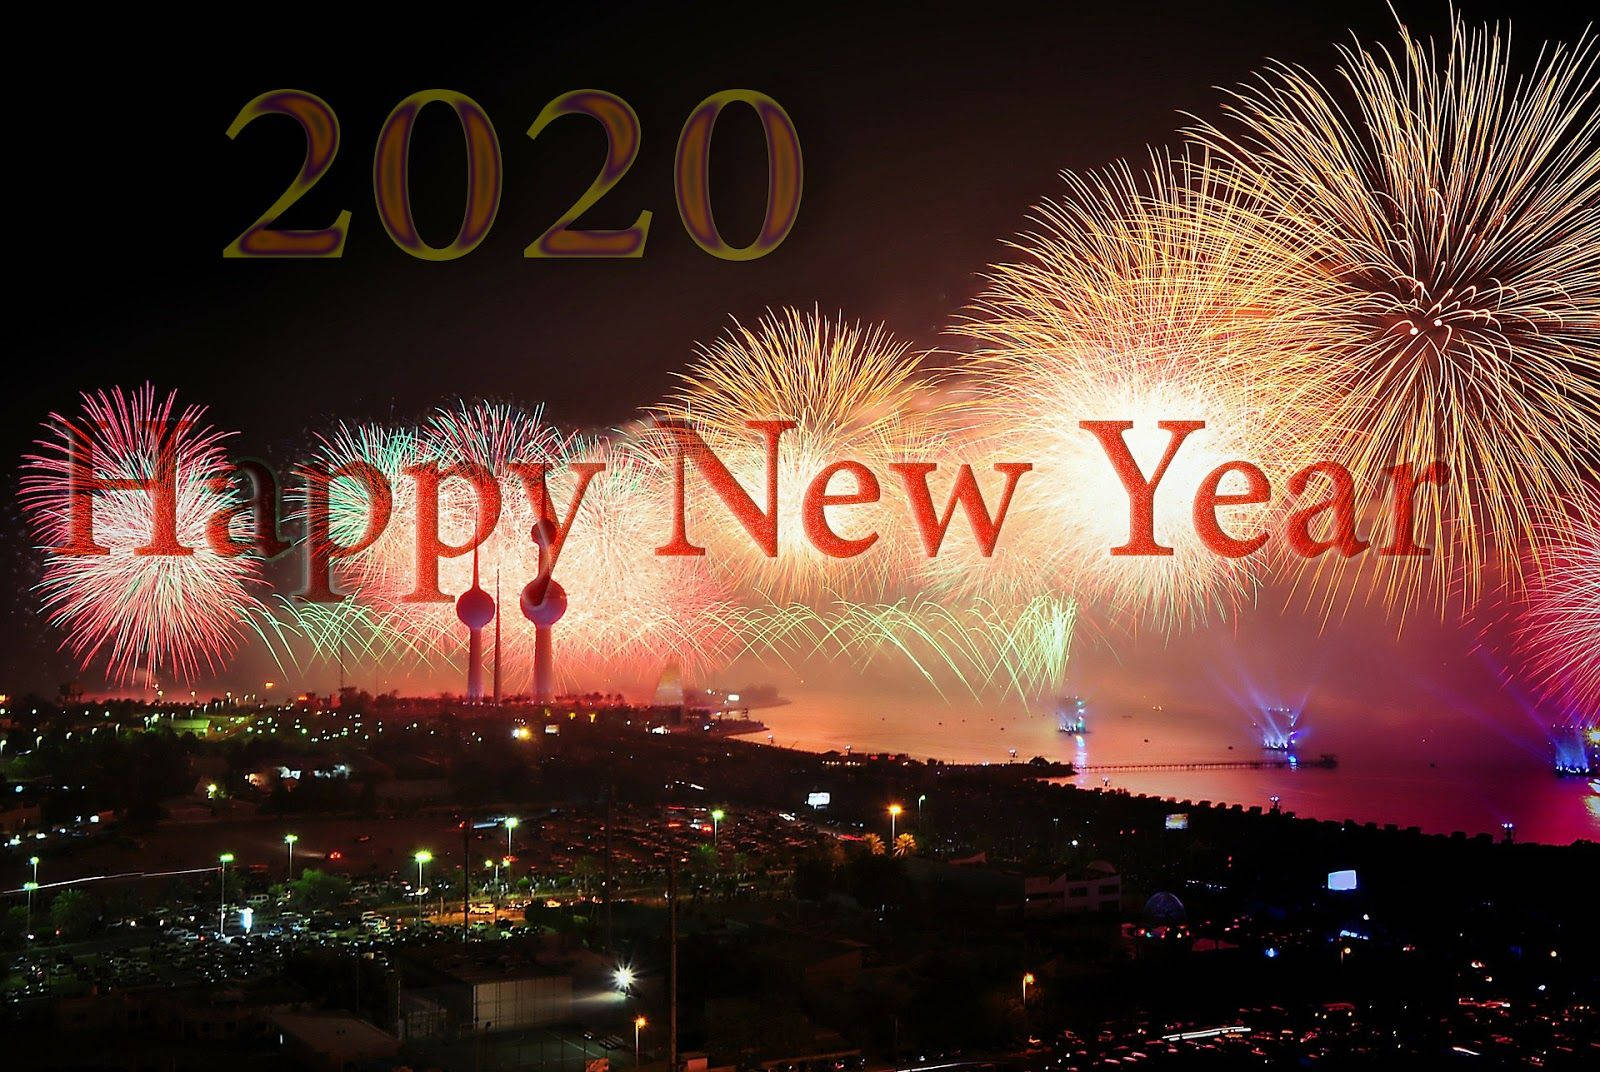 Happy New Year 2020 - Happy New Year 2020 Image Wishes Wallpaper